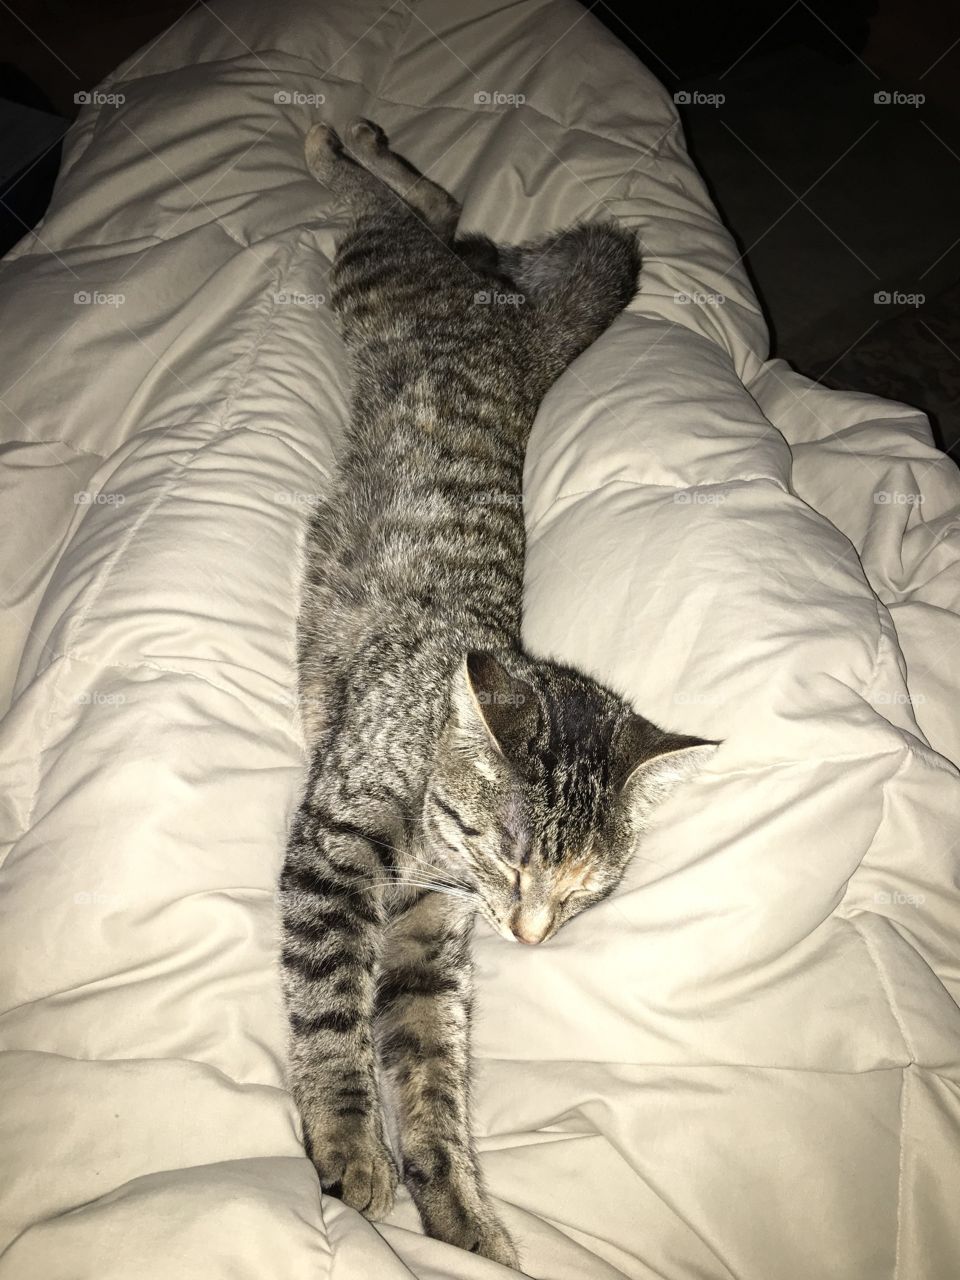 Room to stretch...room to cuddle. Our cat Thunder, always sleeps in crazy positions. We love her! 